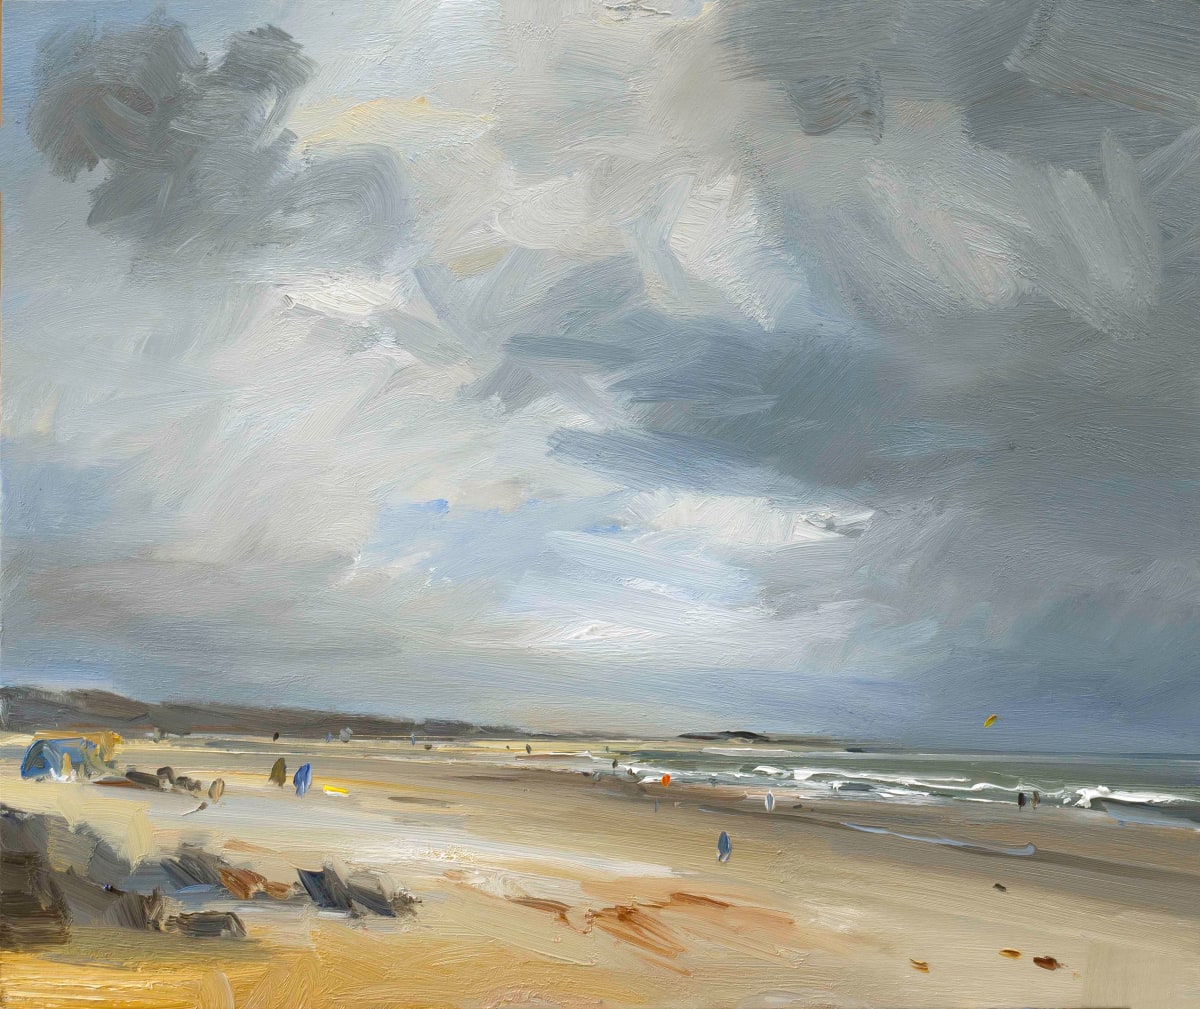 A Summer's Day on the Beach at Brancaster by David Atkins 